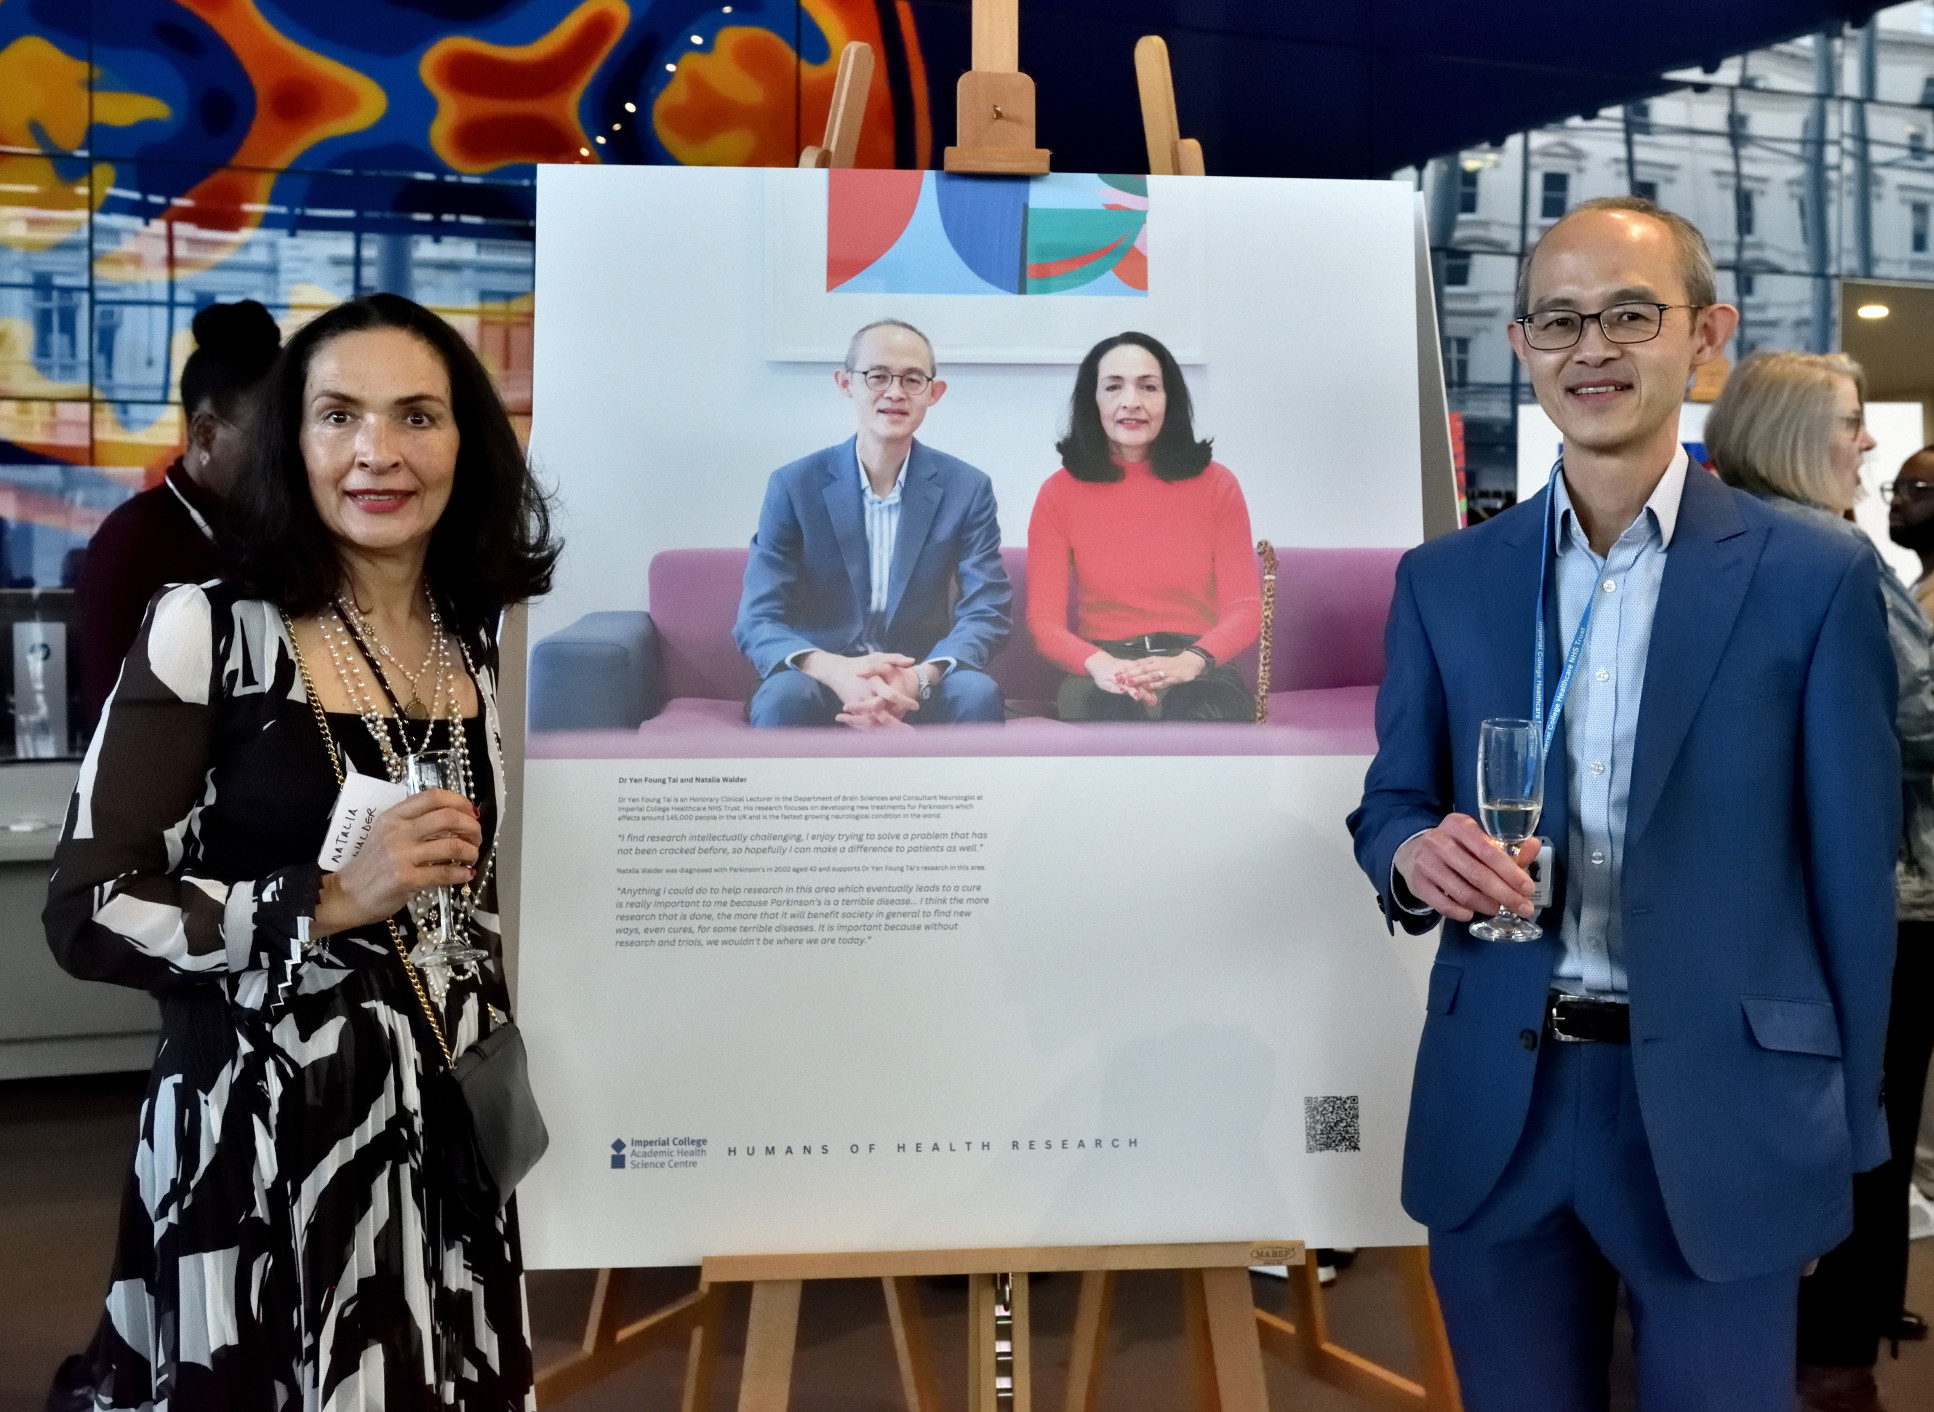 Dr Yen Foung Tai and Natalia Walder standing by their portrait